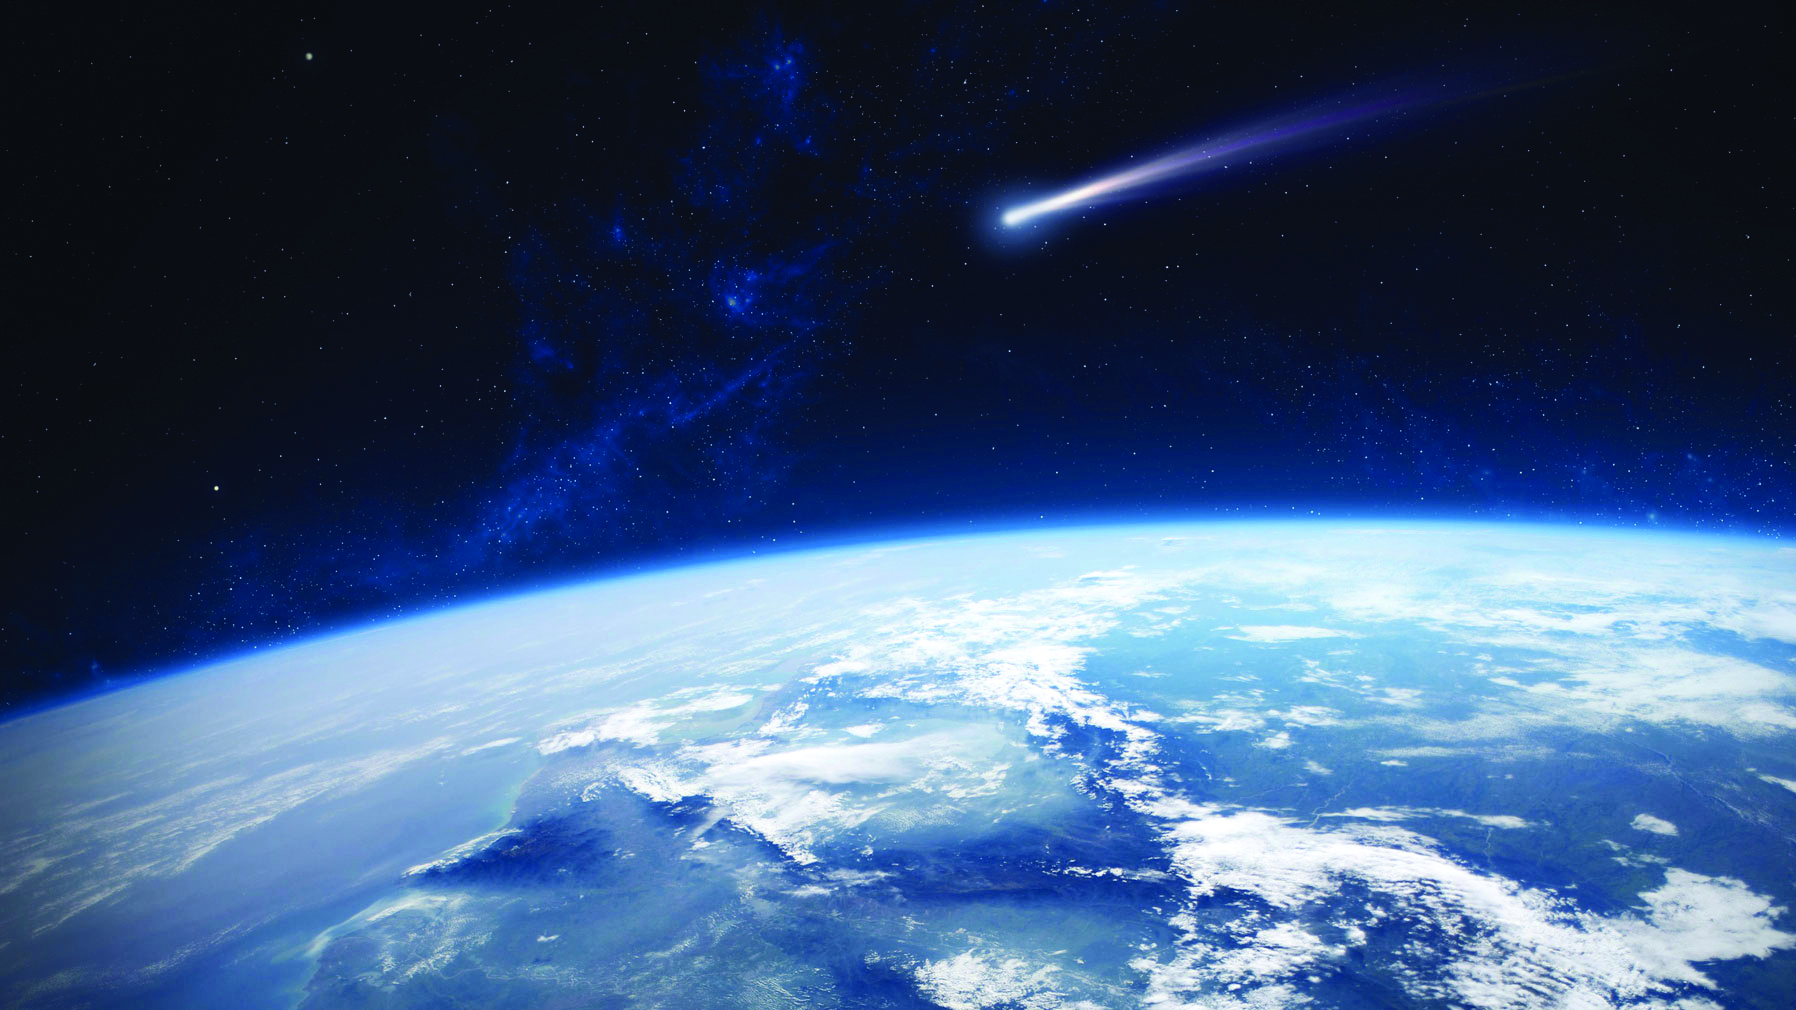 Bright object with fiery trail approaching curve of Earth in image from space